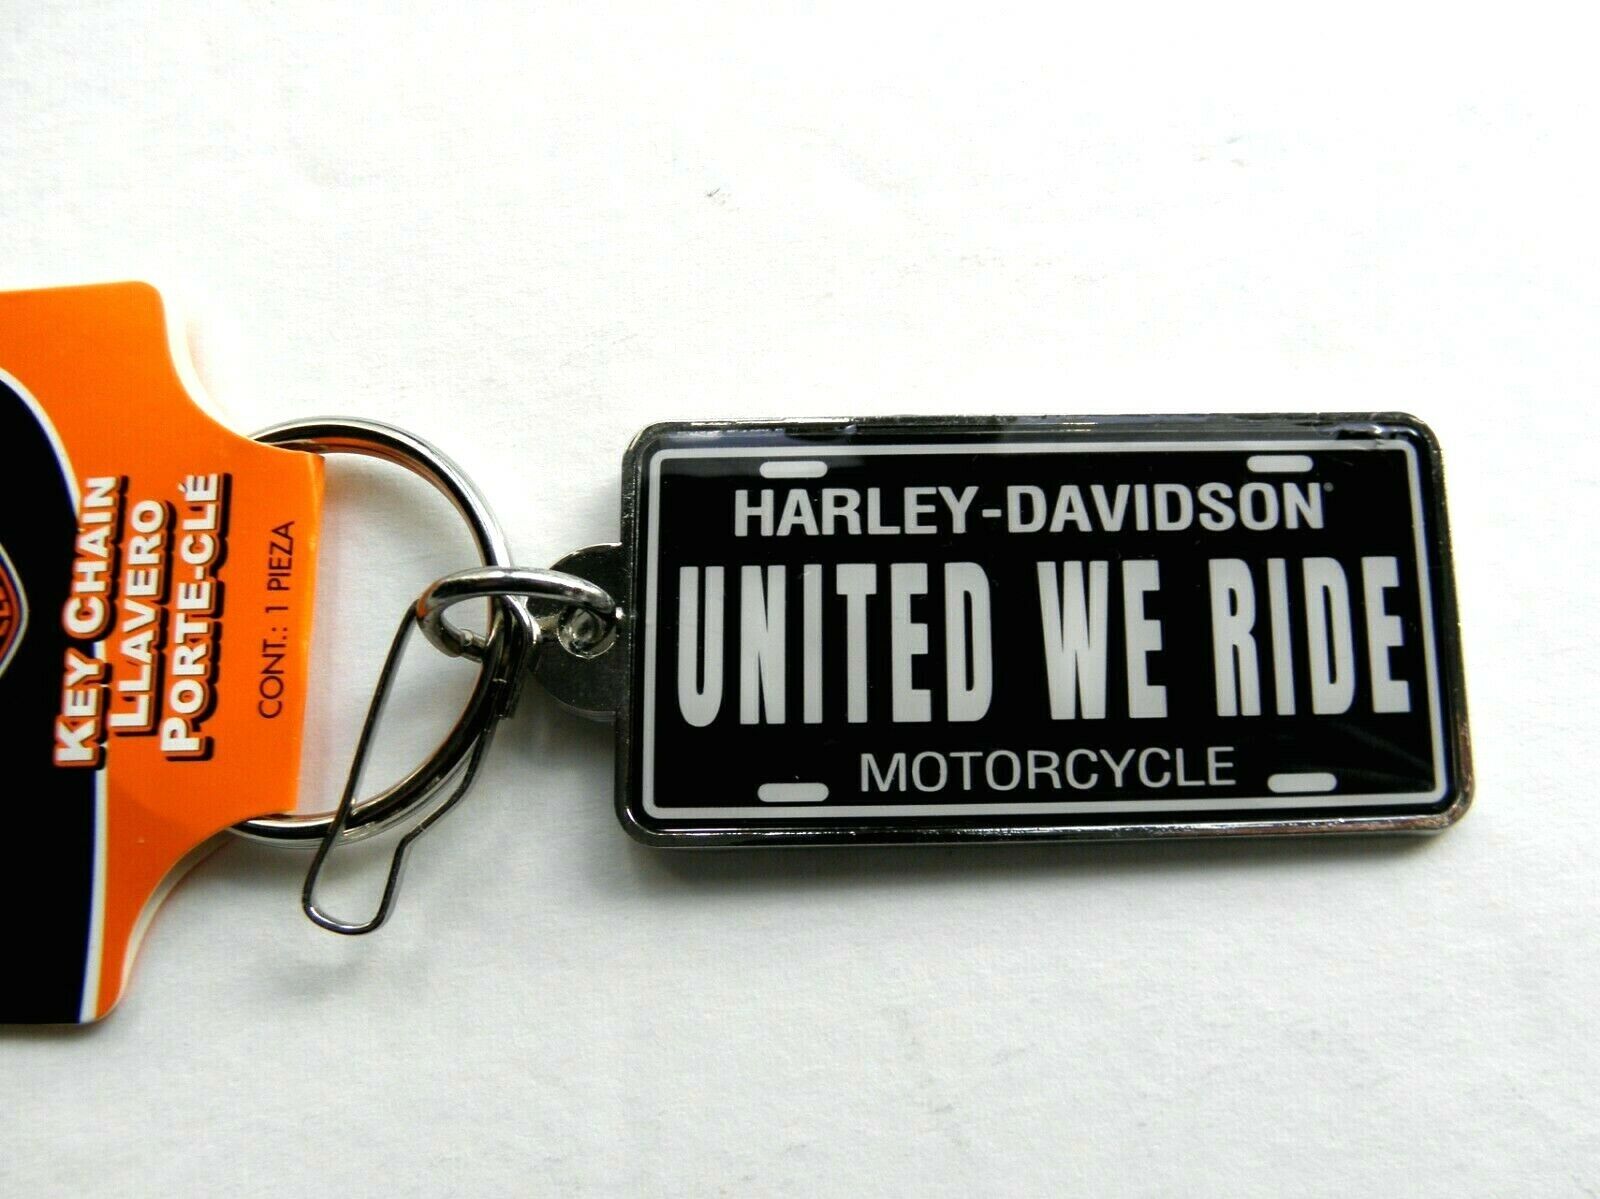 Details about   Harley Davidson United We Ride Key Ring Keychain Chain 2.5 x 1.25 inches keyring 